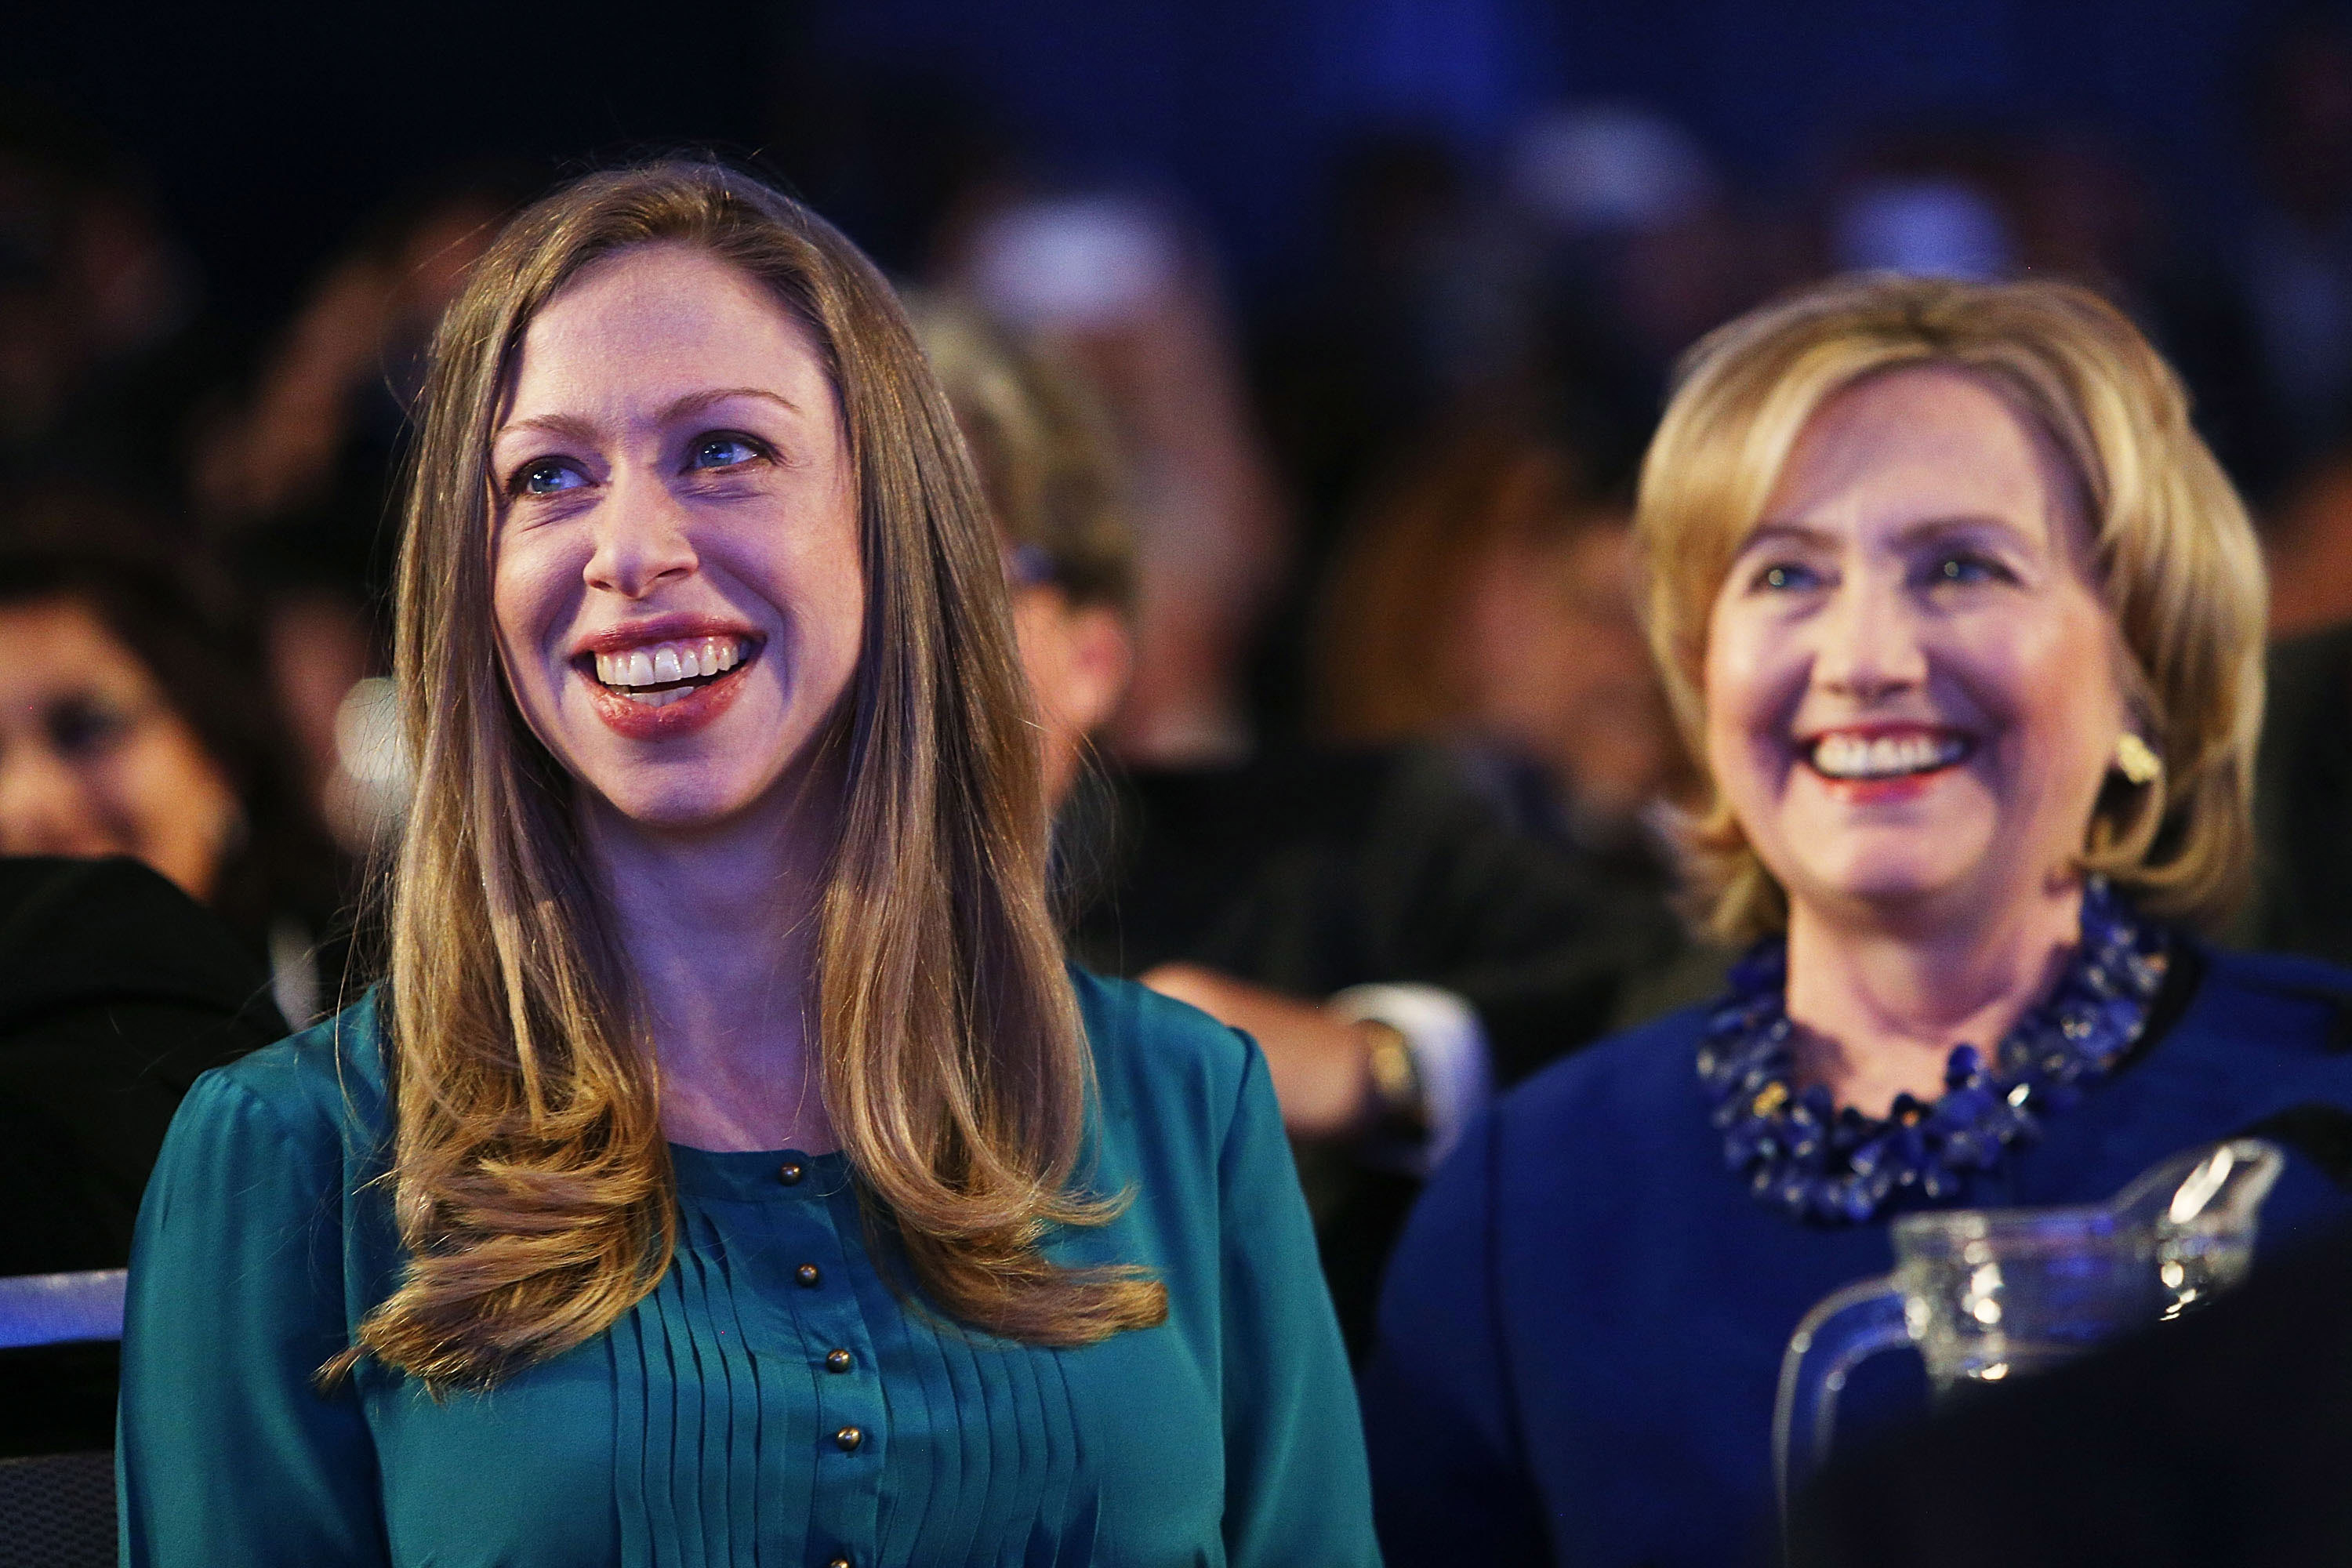 Former U.S. Secretary of State Hillary Clinton and daughter Chelsea Clinton are viewed in the audience as U.S. President Barack Obama, who is in New York City for the 69th Session of the United Nations General Assembly, speaks at the Clinton Global Initiative on September 23, 2014 in New York City. (Spencer Platt—Getty Images)